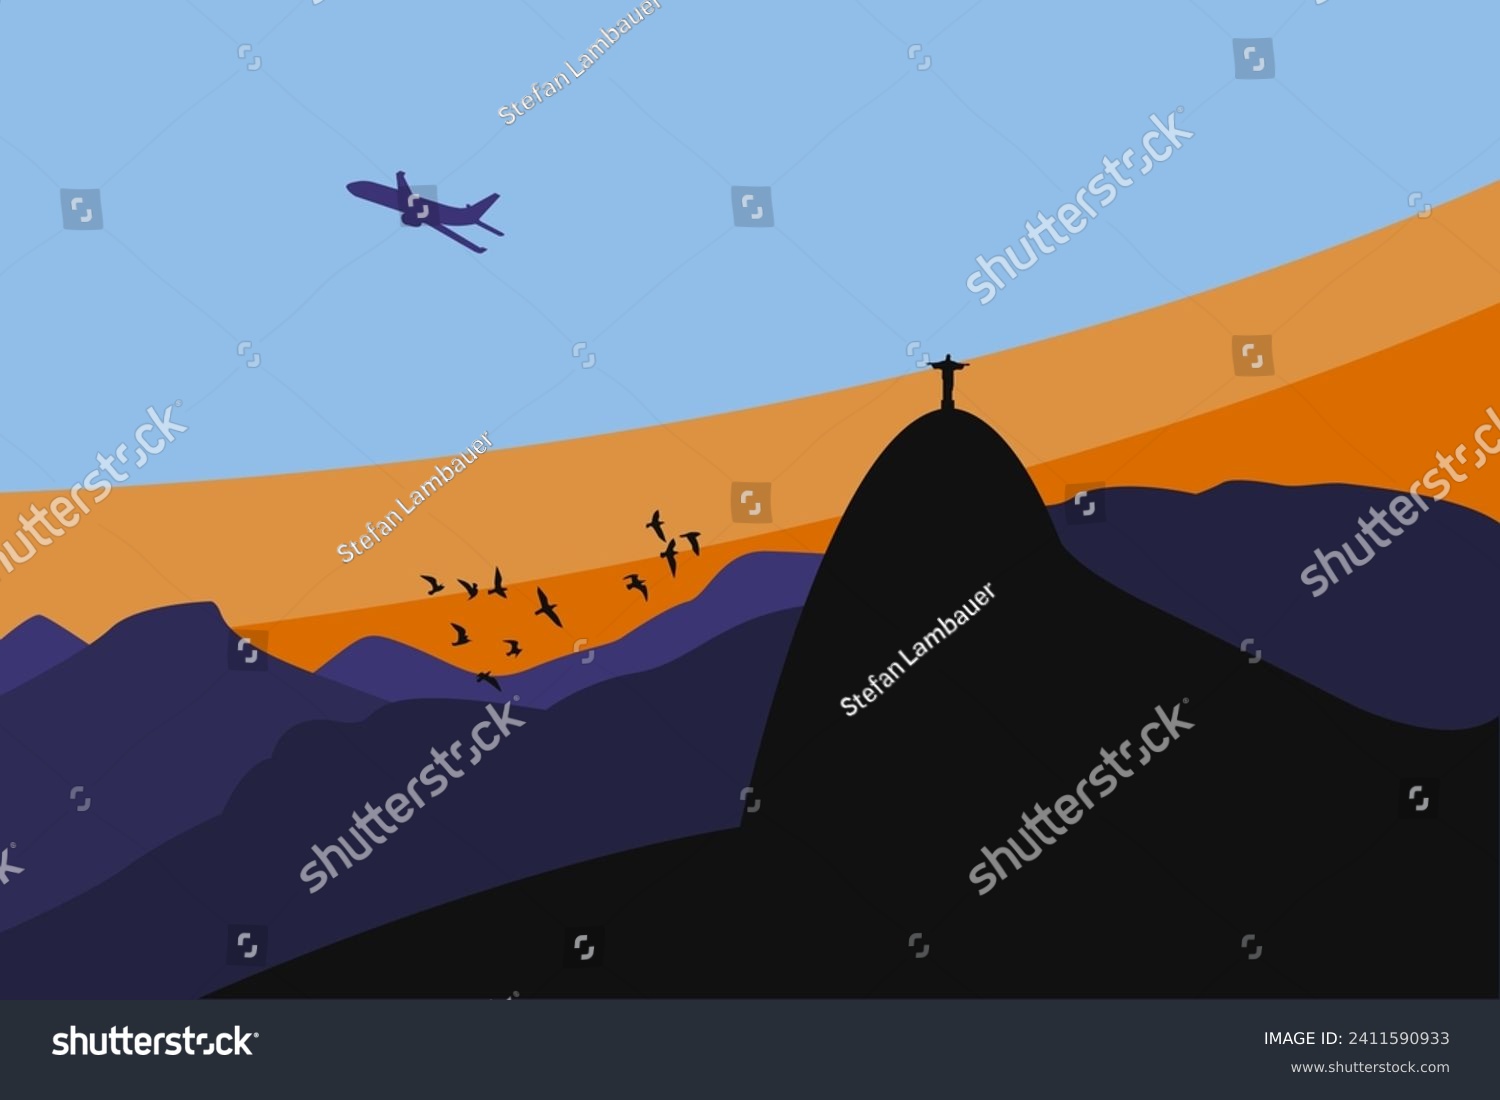 SVG of Rio de janeiro, Brazil. Statue of Christ on Corcovado Mountain during sunset with blue sky. Airplane silhouette in the sky and birds flying. Tijuca National Park. EPS Illustration. svg